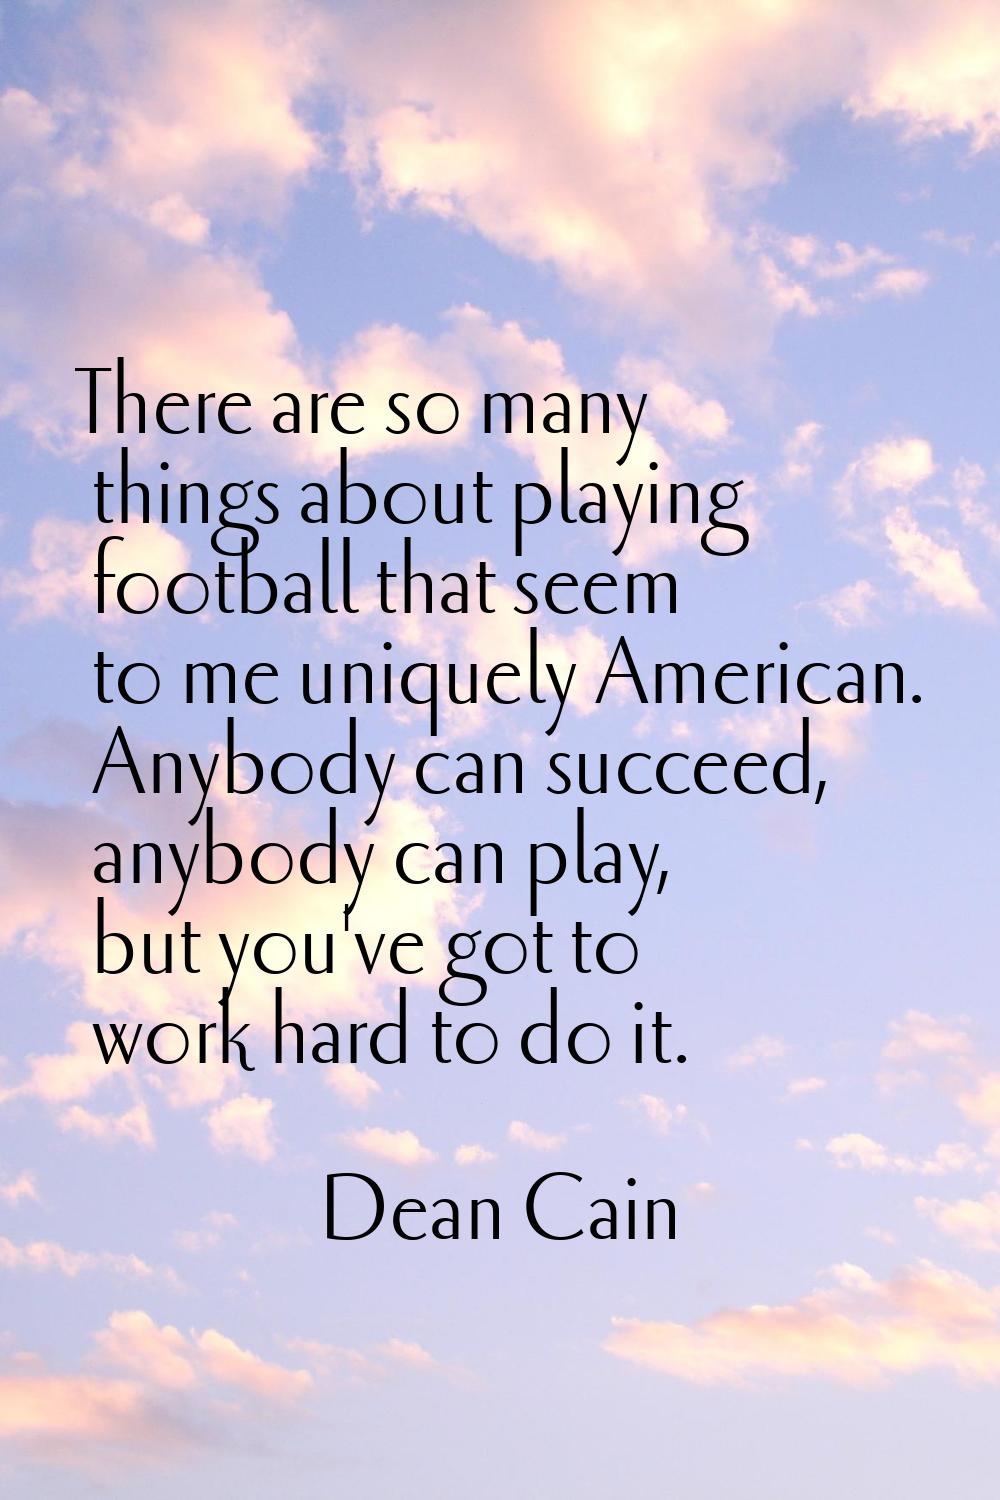 There are so many things about playing football that seem to me uniquely American. Anybody can succ